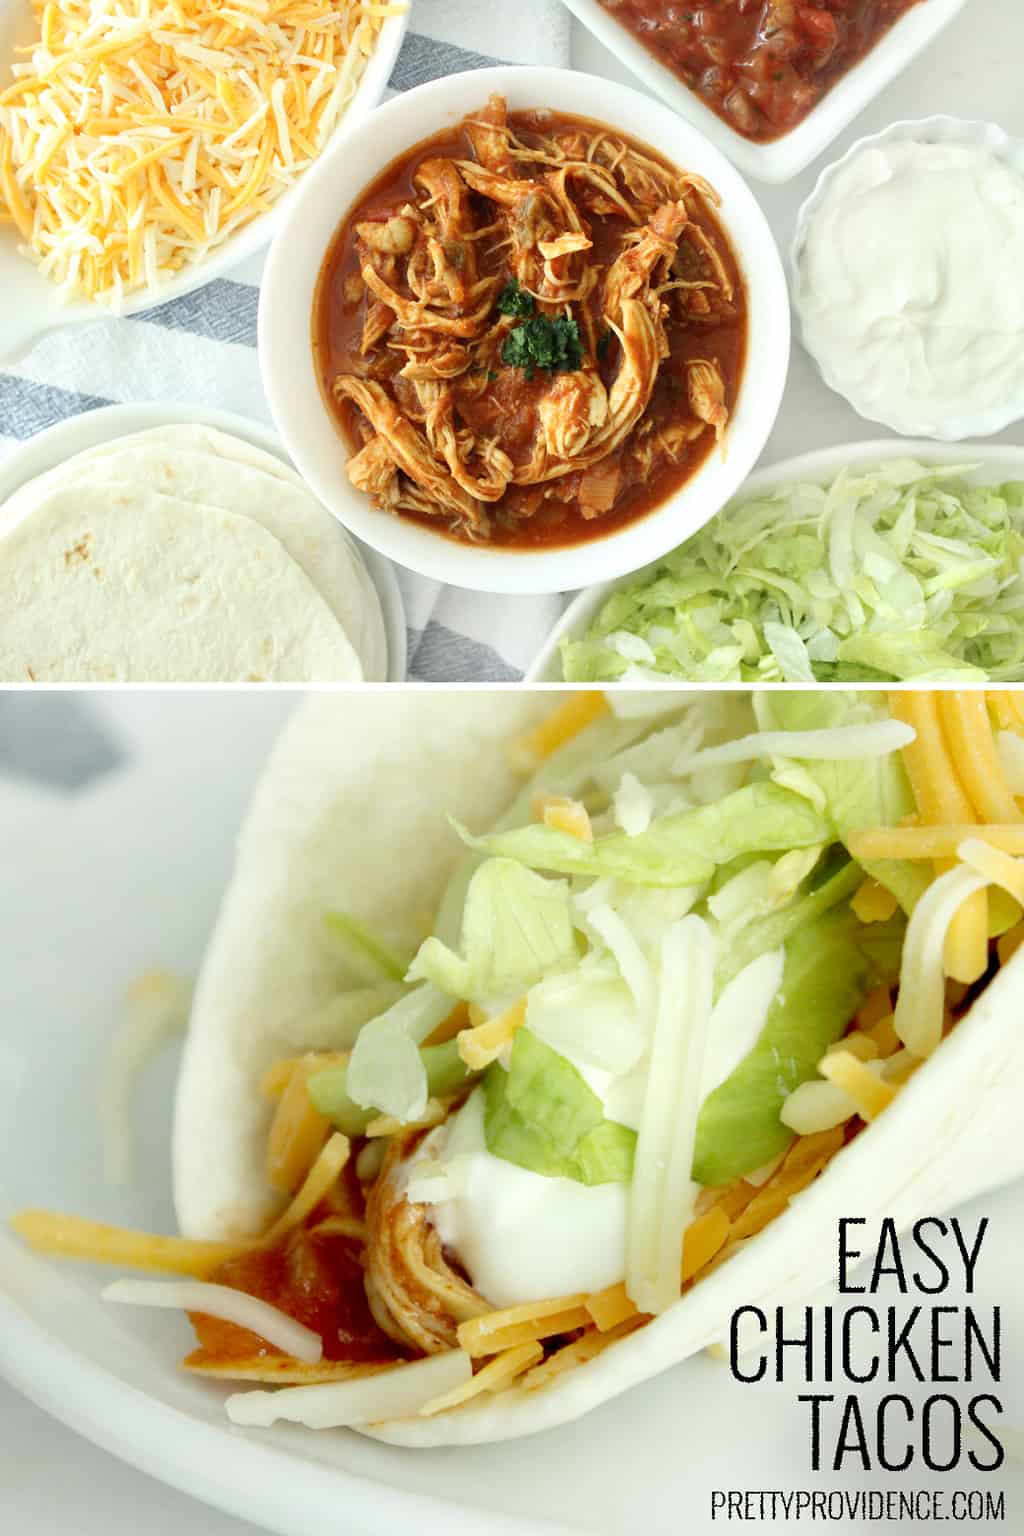 If you are looking for a great crockpot chicken taco recipe, these slow cooker shredded chicken tacos are super easy, and out of this world delicious!